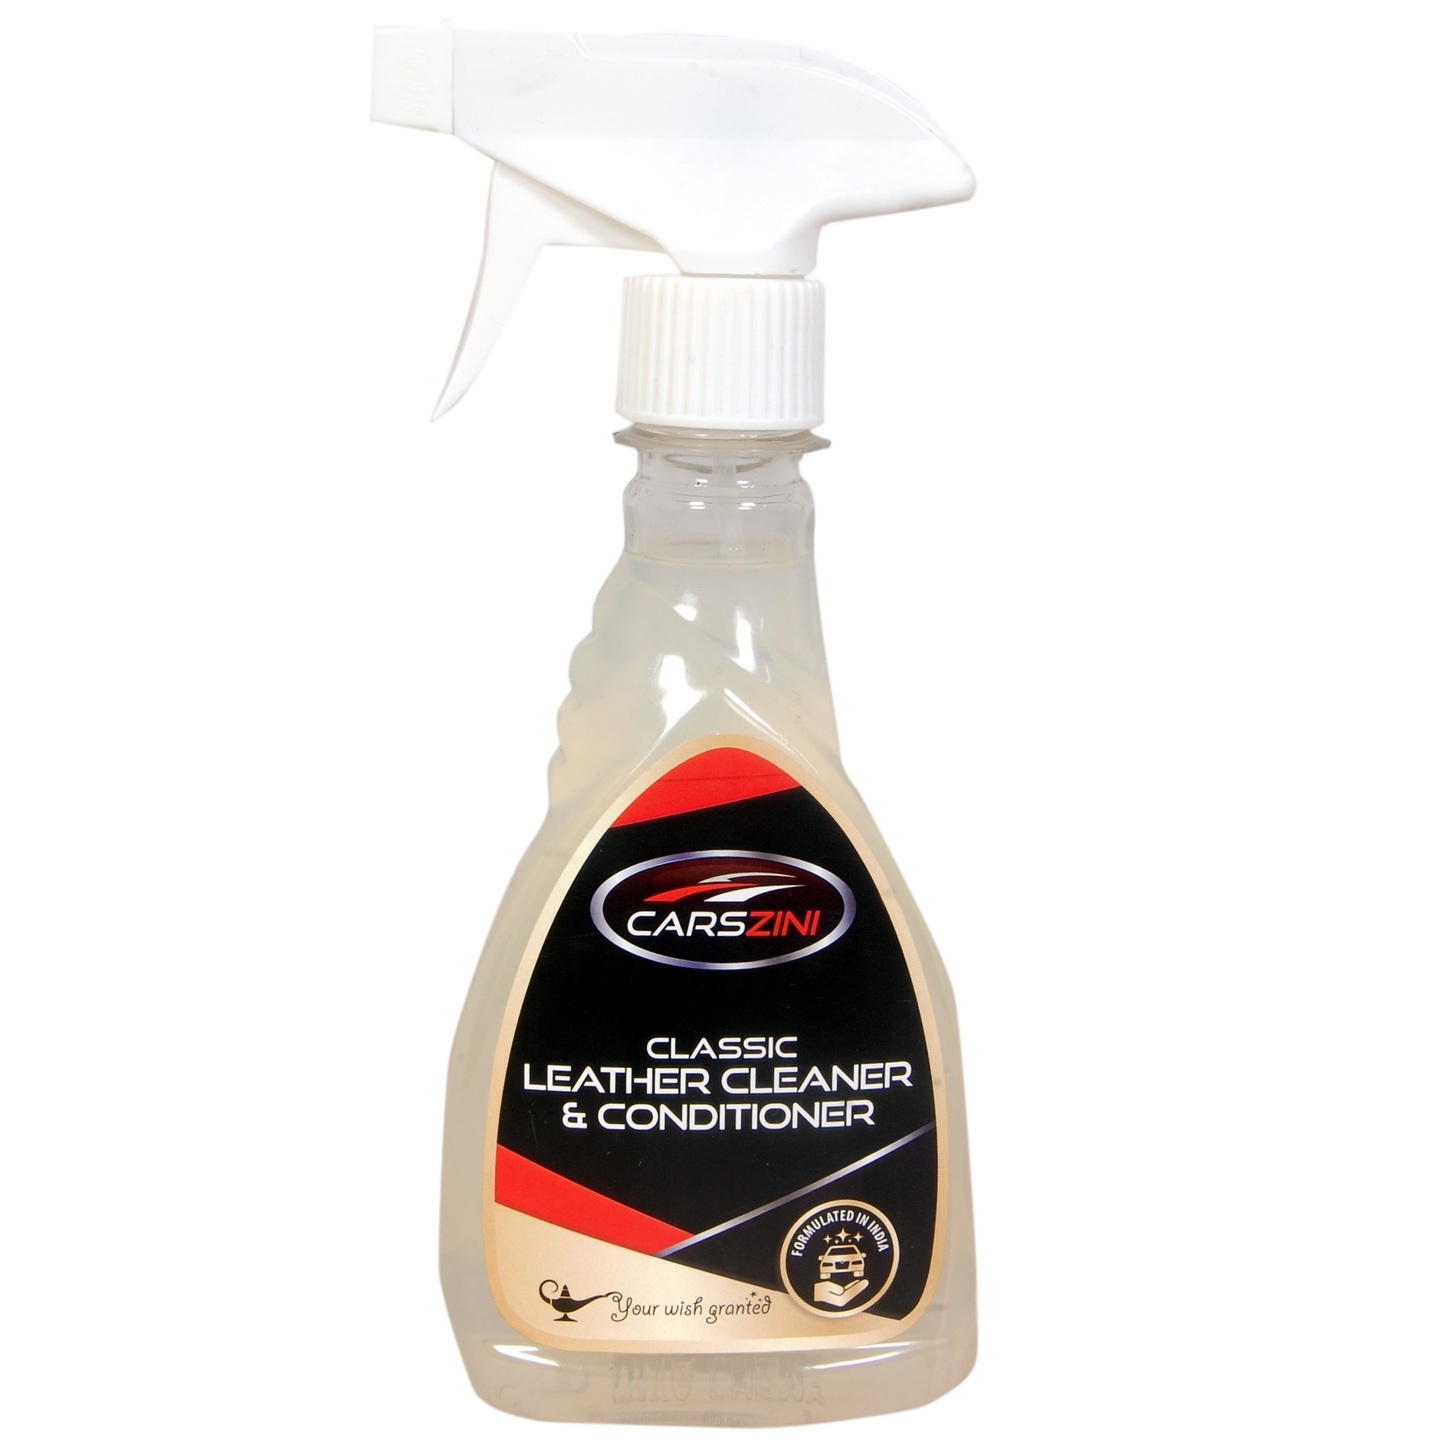 CARSZINI Leather Cleaner & Conditioner 330 ml